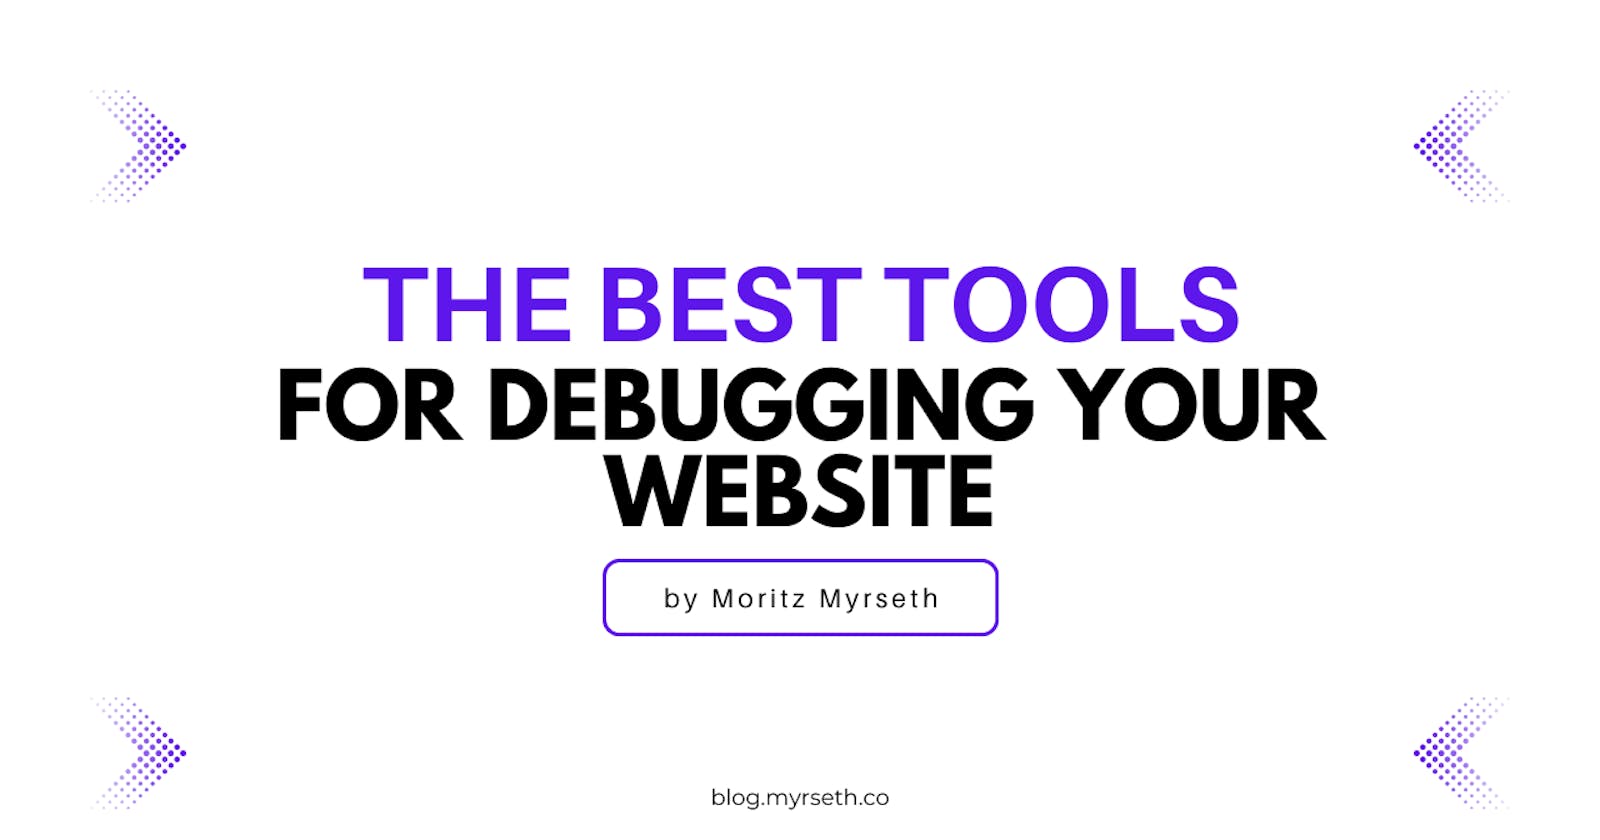 The Best Tools for Debugging Your Website